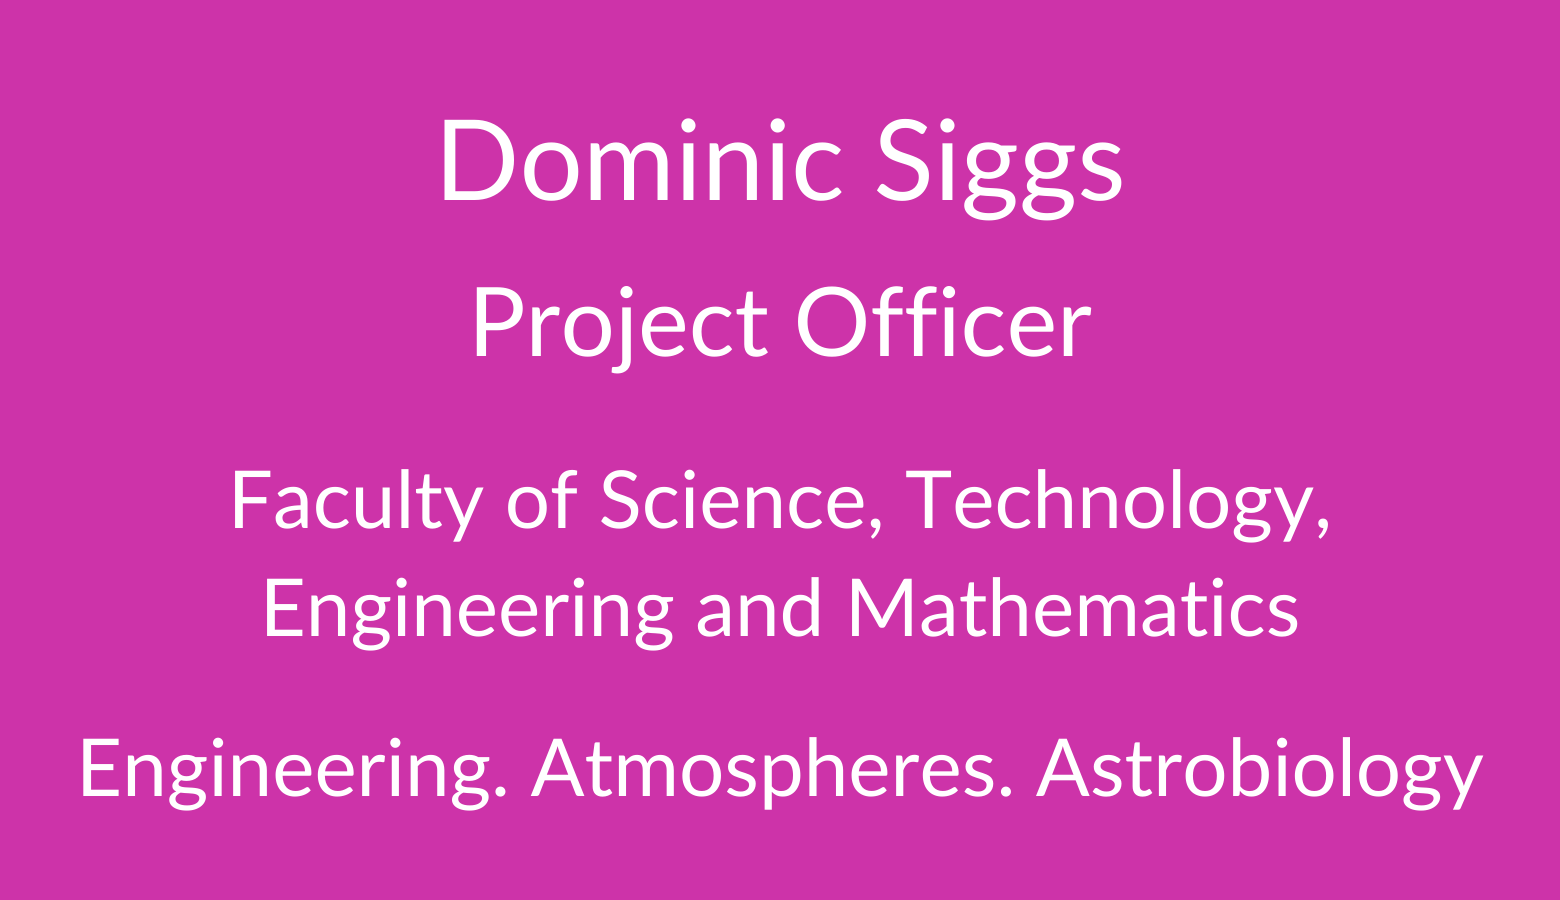 Dominic Siggs. Project Officer. Faculty of Science. Technology, Engineering and Mathematics. Engineering. Atmospheres. Astrobiology.